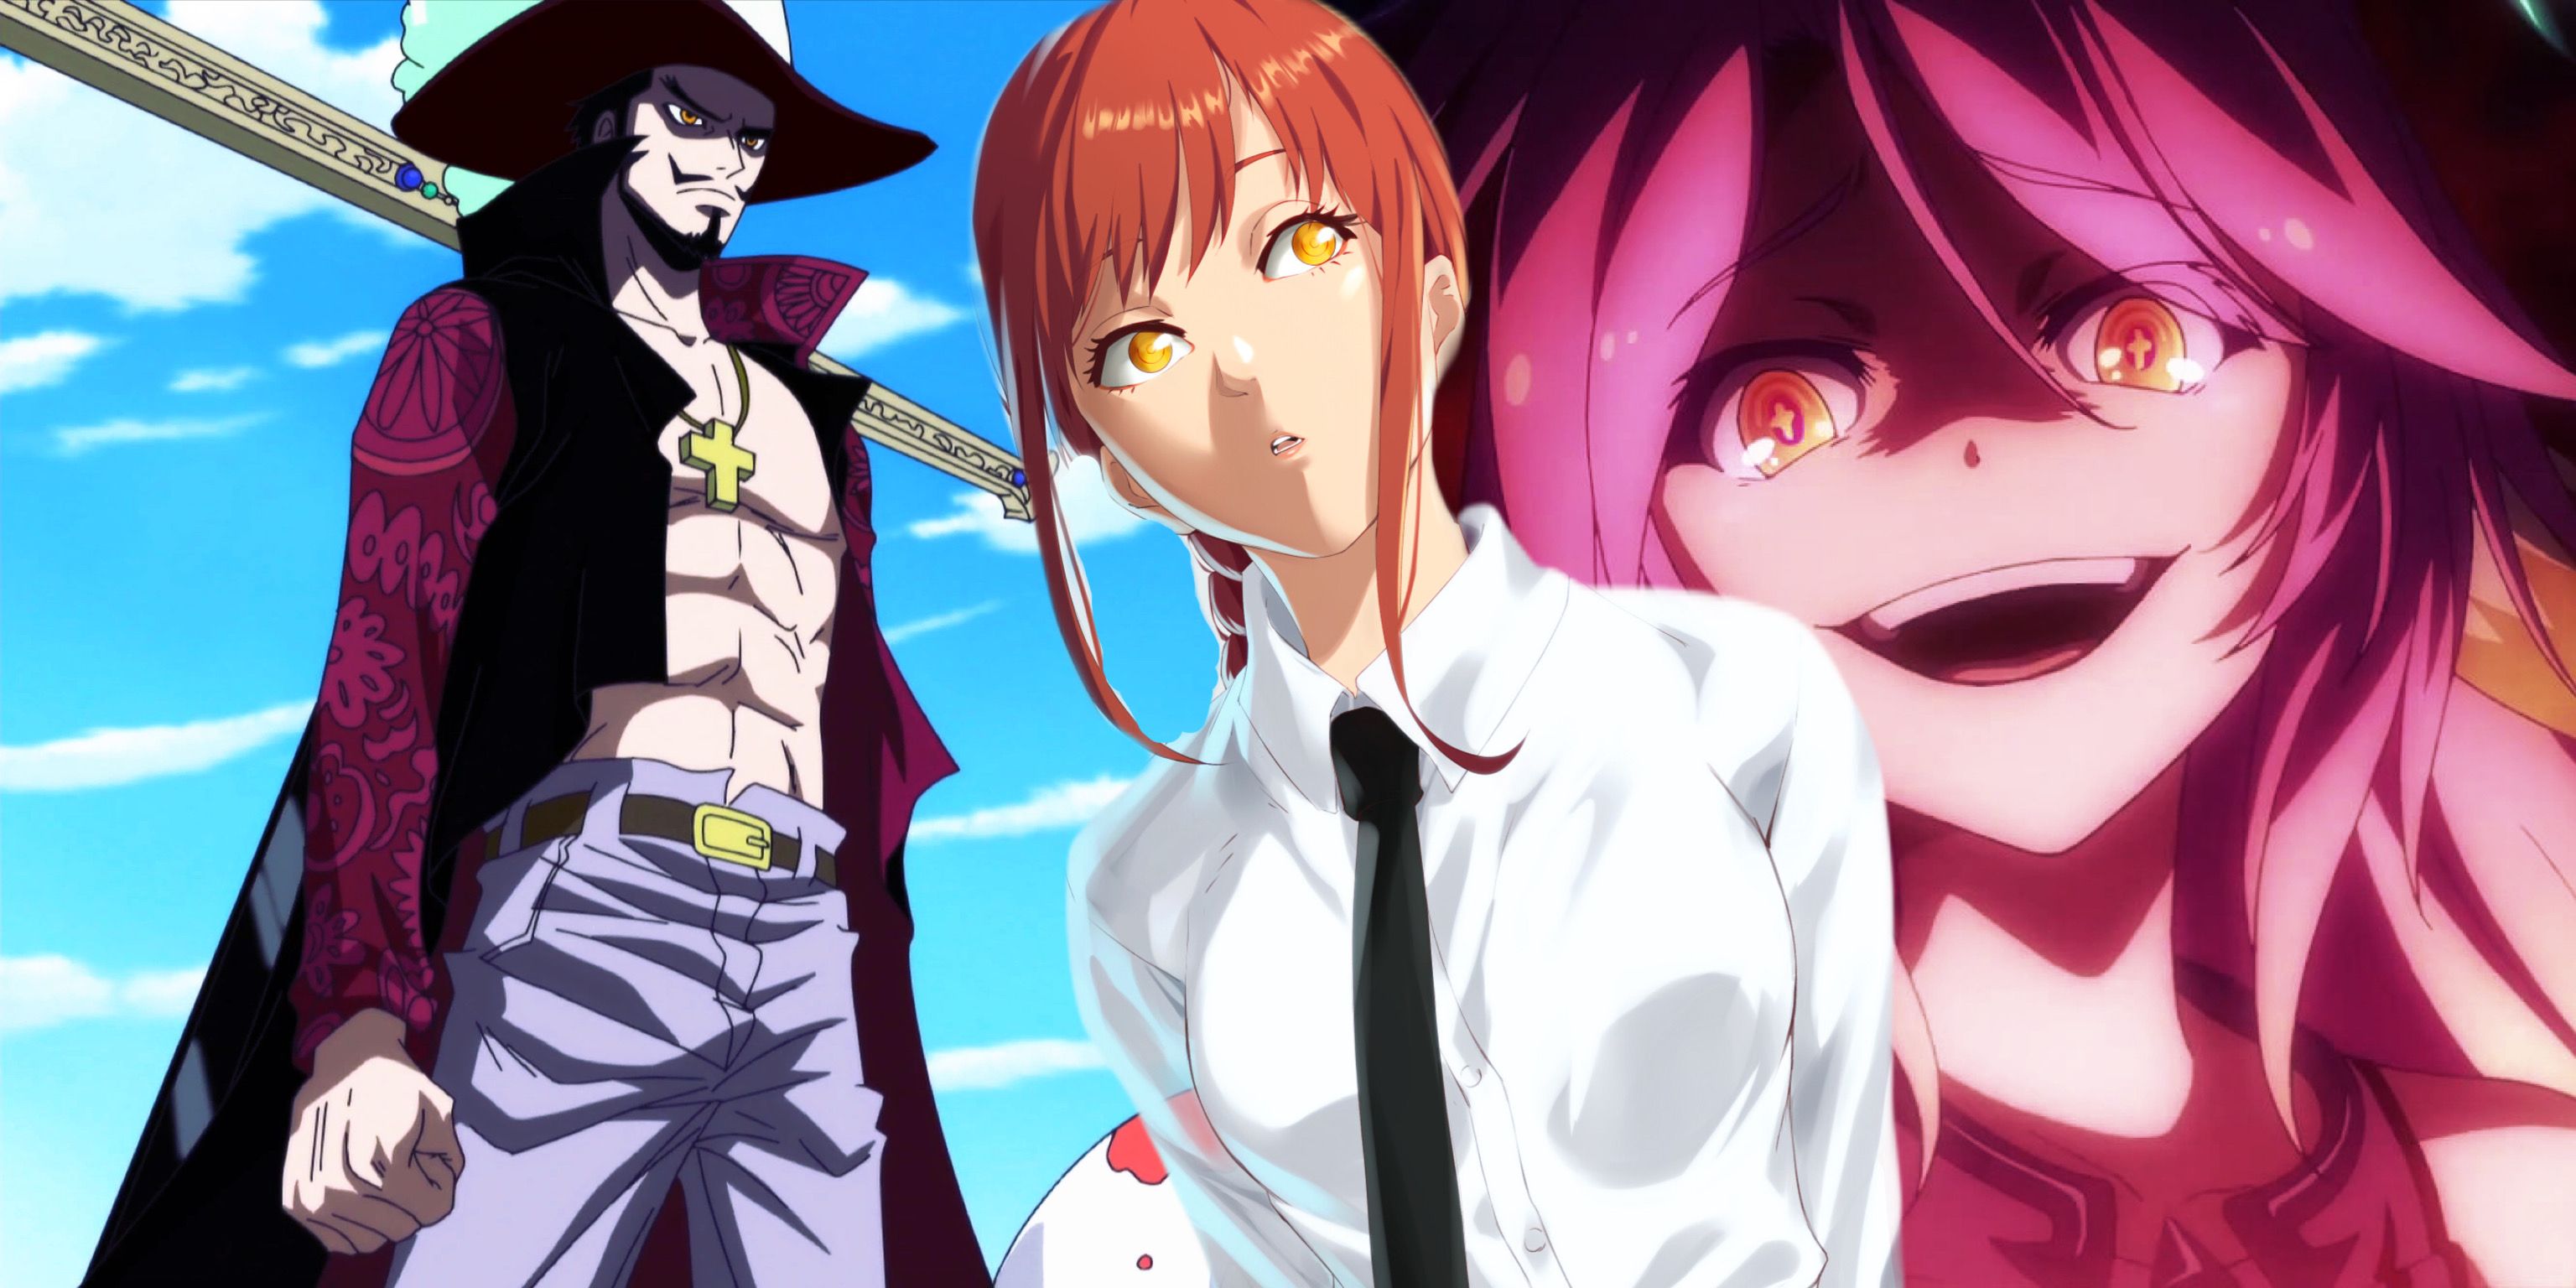 Anime C The Money of Soul and Possibility Control Q anime character  wallpaper  1500x938  316020  WallpaperUP